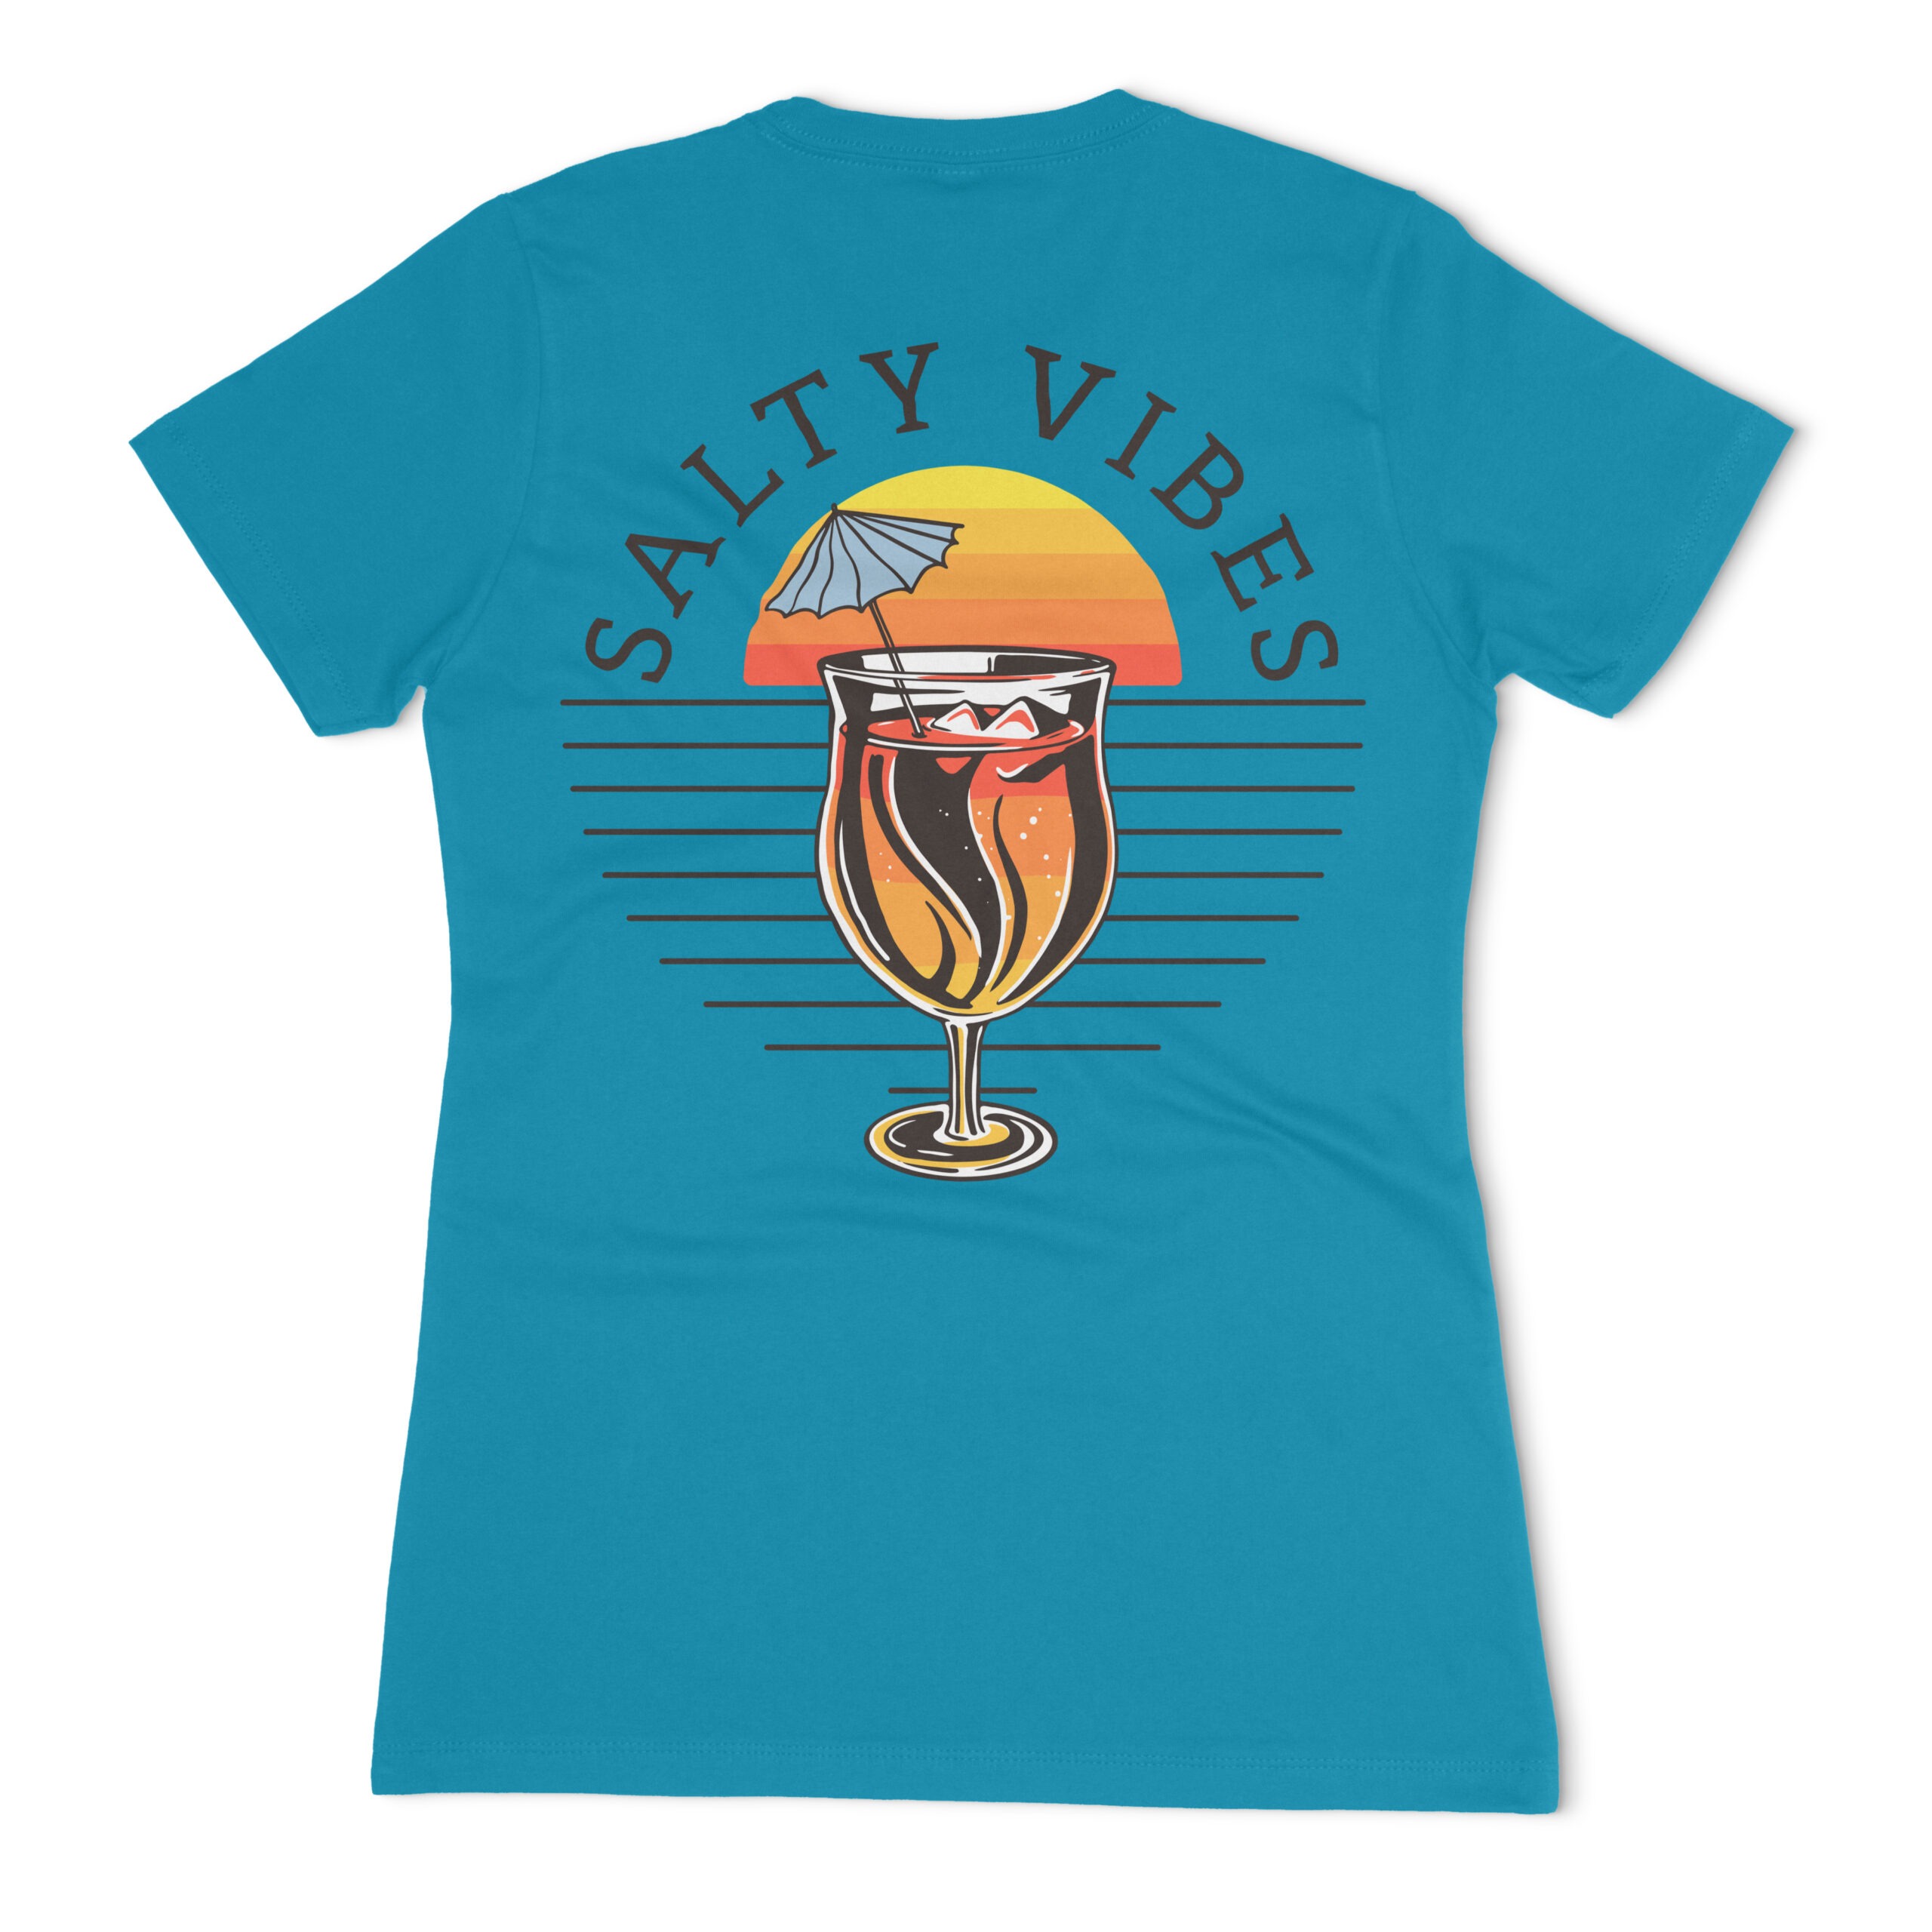 Salty Vibes Drink and Sunset Women's Fitted T-Shirt - Turquoise, 2XL